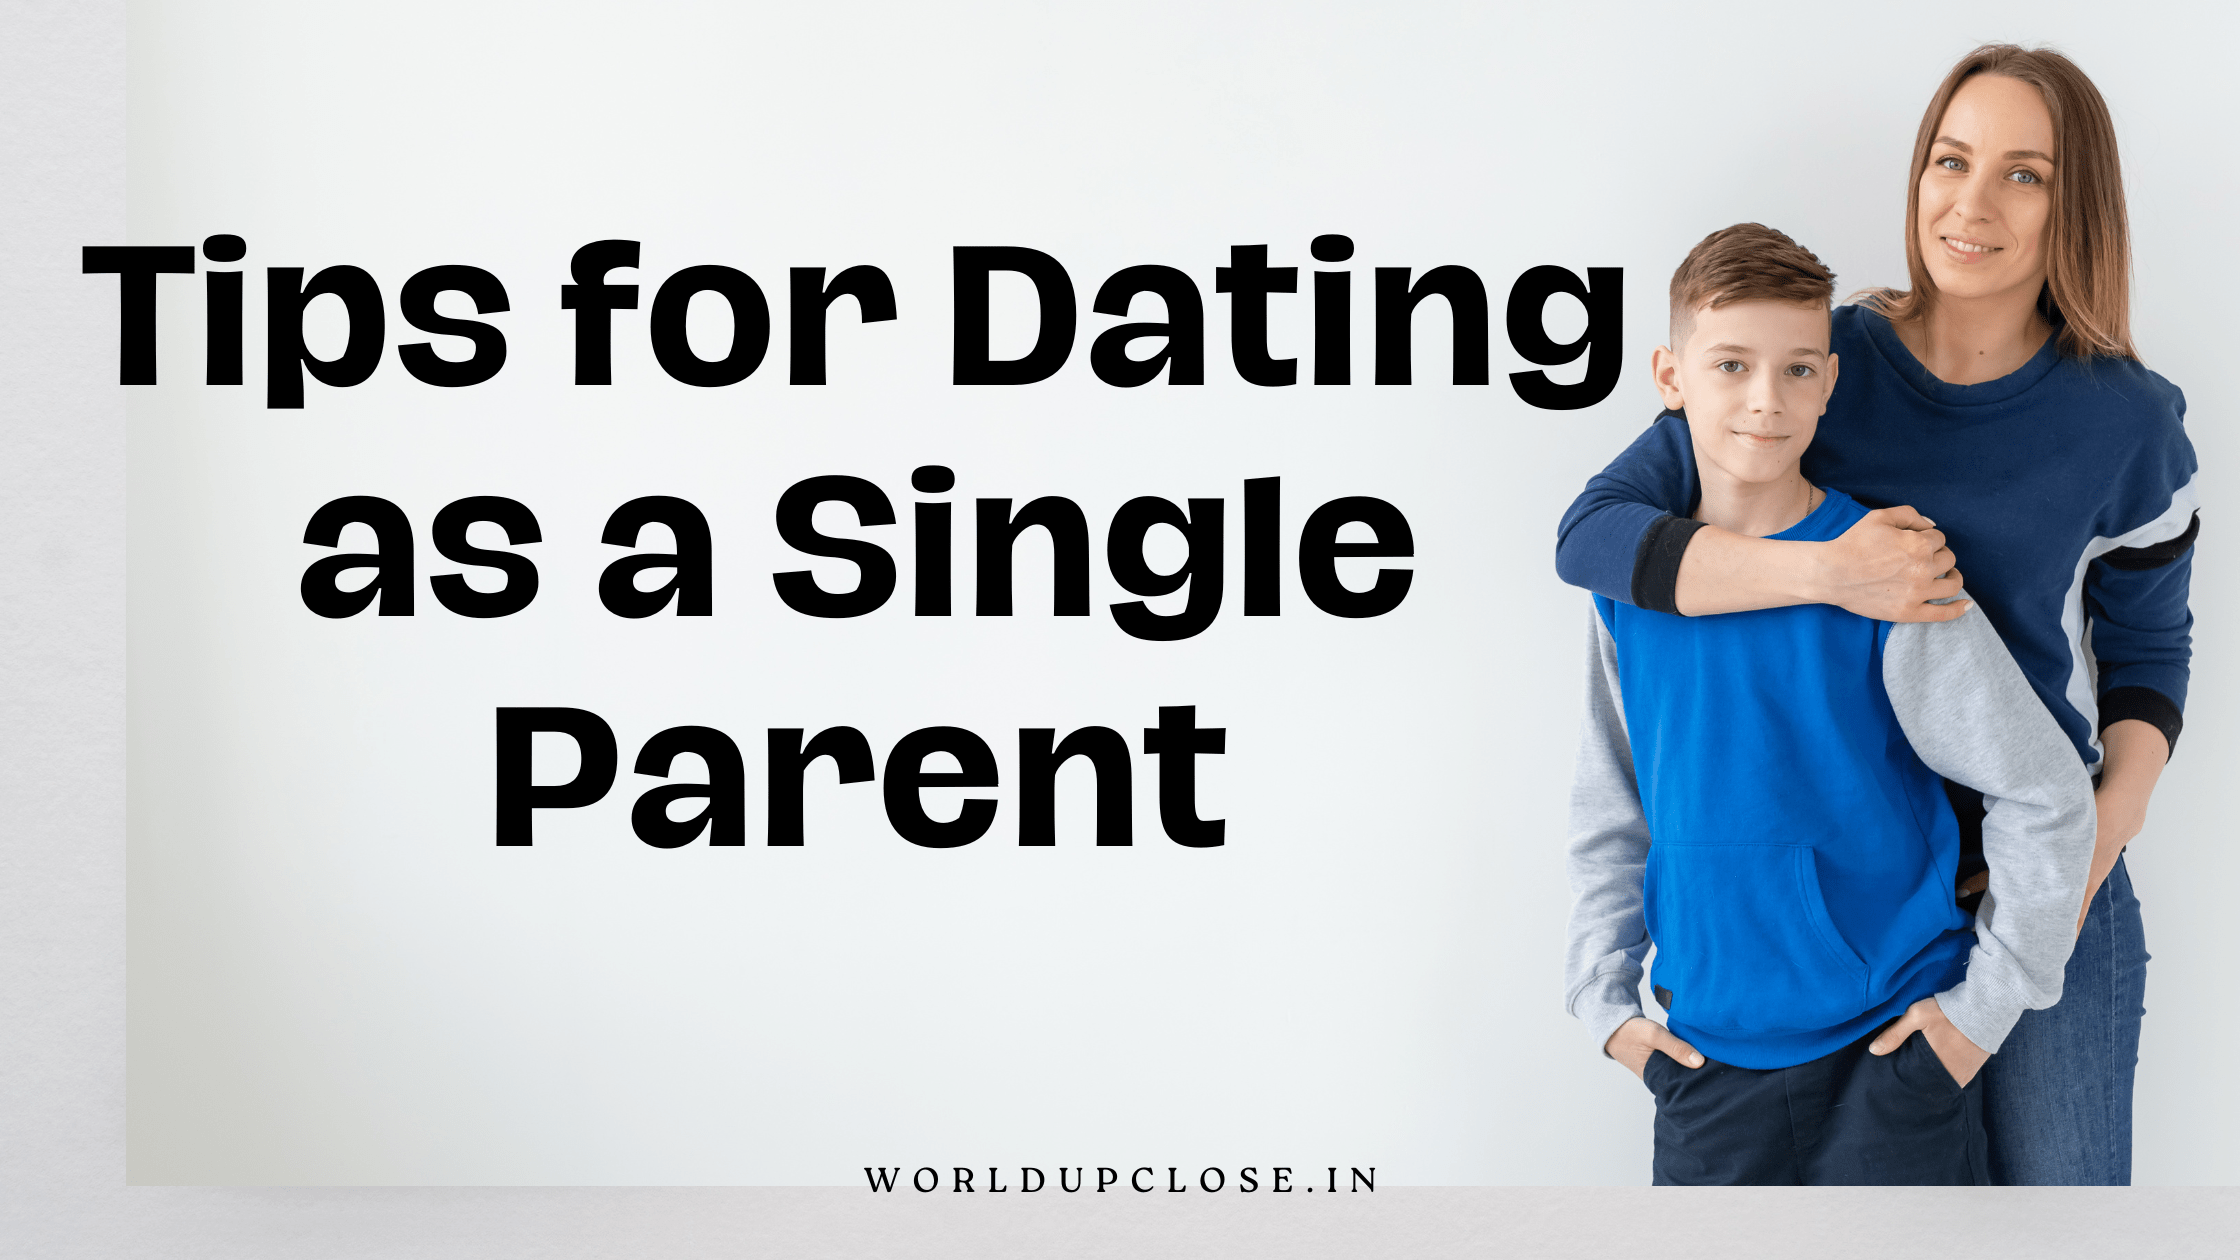 25 Helpful Tips for Dating as a Single Parent 45